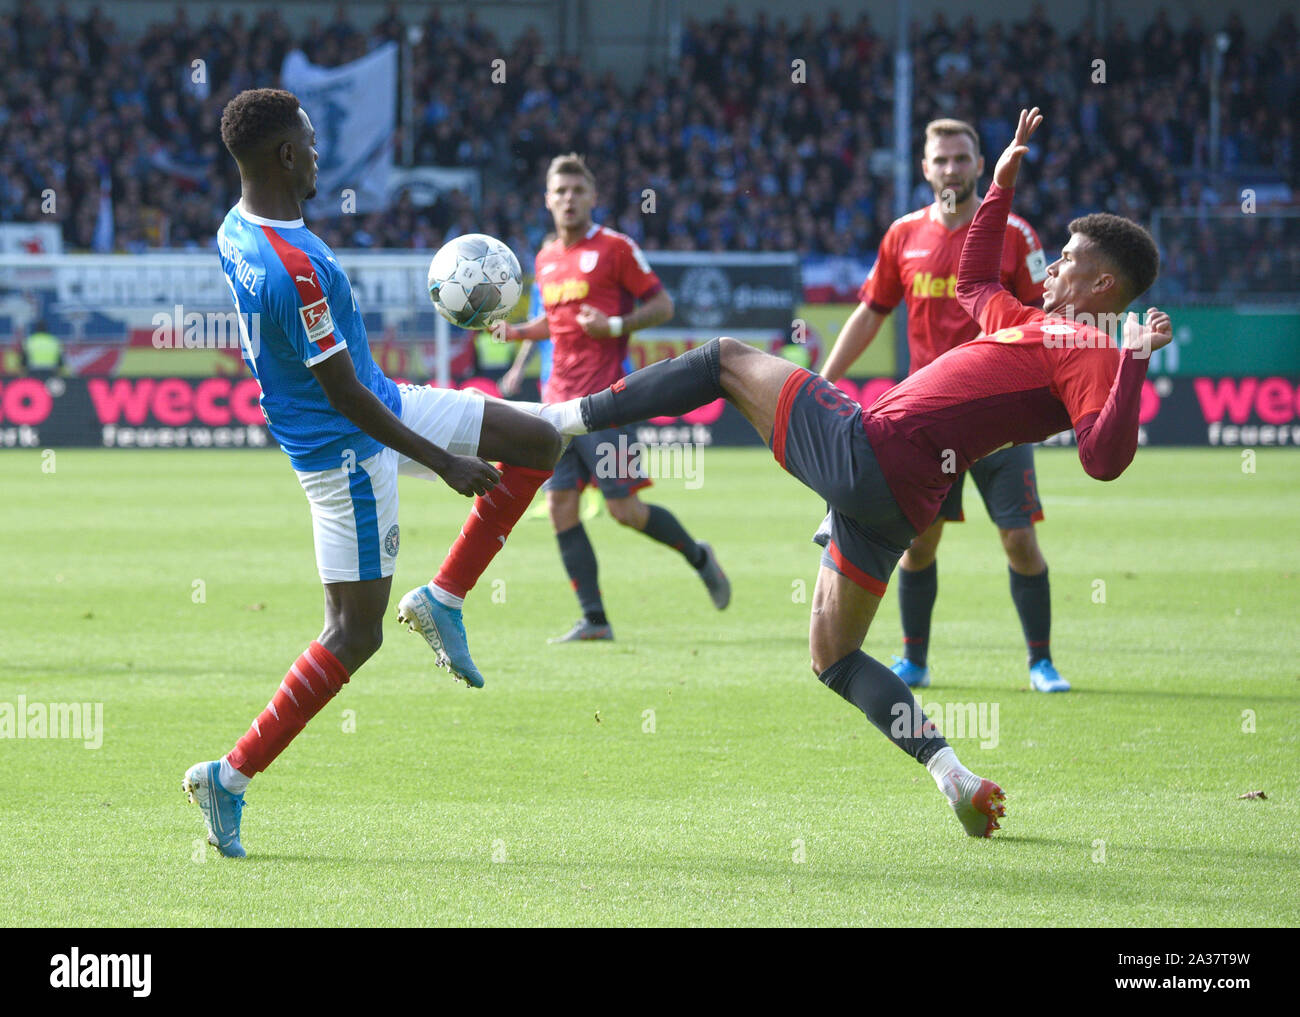 Kiel, Germany. 06th Oct, 2019. Soccer: 2nd Bundesliga, Matchday 9: Holstein Kiel - Jahn Regensburg in Holstein Stadium. Kiel's David Atanga (l) and Regensburg's Chima Okoroji fight for the ball. Credit: Daniel Bockwoldt/dpa - IMPORTANT NOTE: In accordance with the requirements of the DFL Deutsche Fußball Liga or the DFB Deutscher Fußball-Bund, it is prohibited to use or have used photographs taken in the stadium and/or the match in the form of sequence images and/or video-like photo sequences./dpa/Alamy Live News Stock Photo